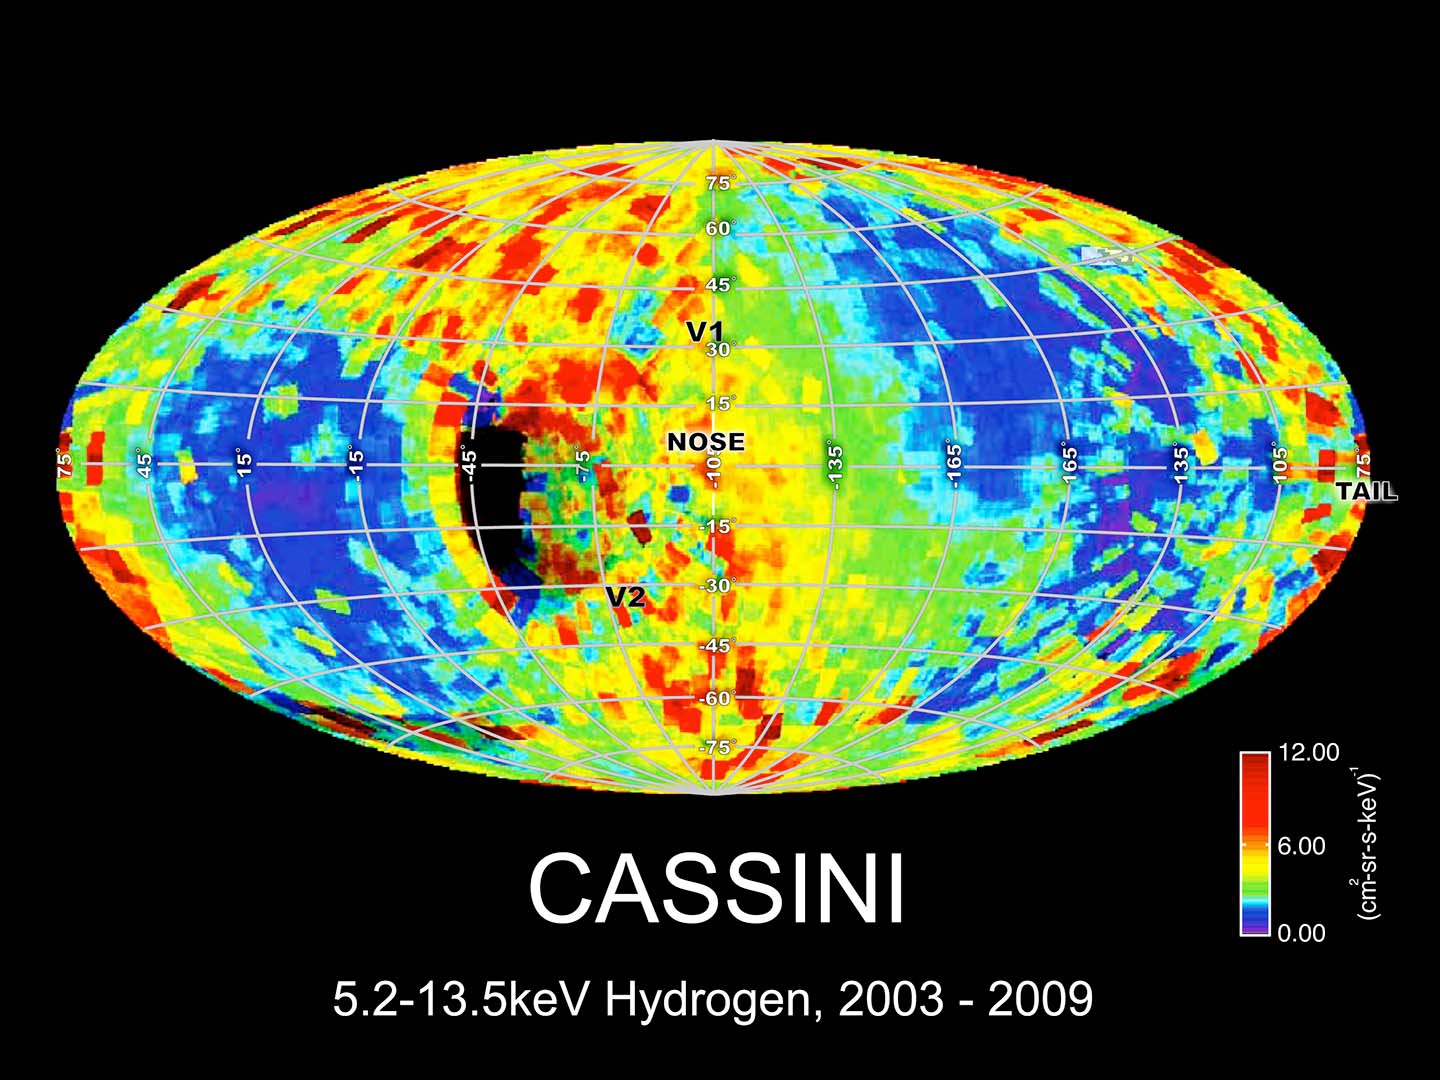 Full sky image of the energetic neutral atom emission from the sheath of hot particles formed in the region where the solar wind collides with the interstellar medium (the heliosheath).  The image is shown in a similar coordinate system to that used to display the just-released data from the IBEX mission.